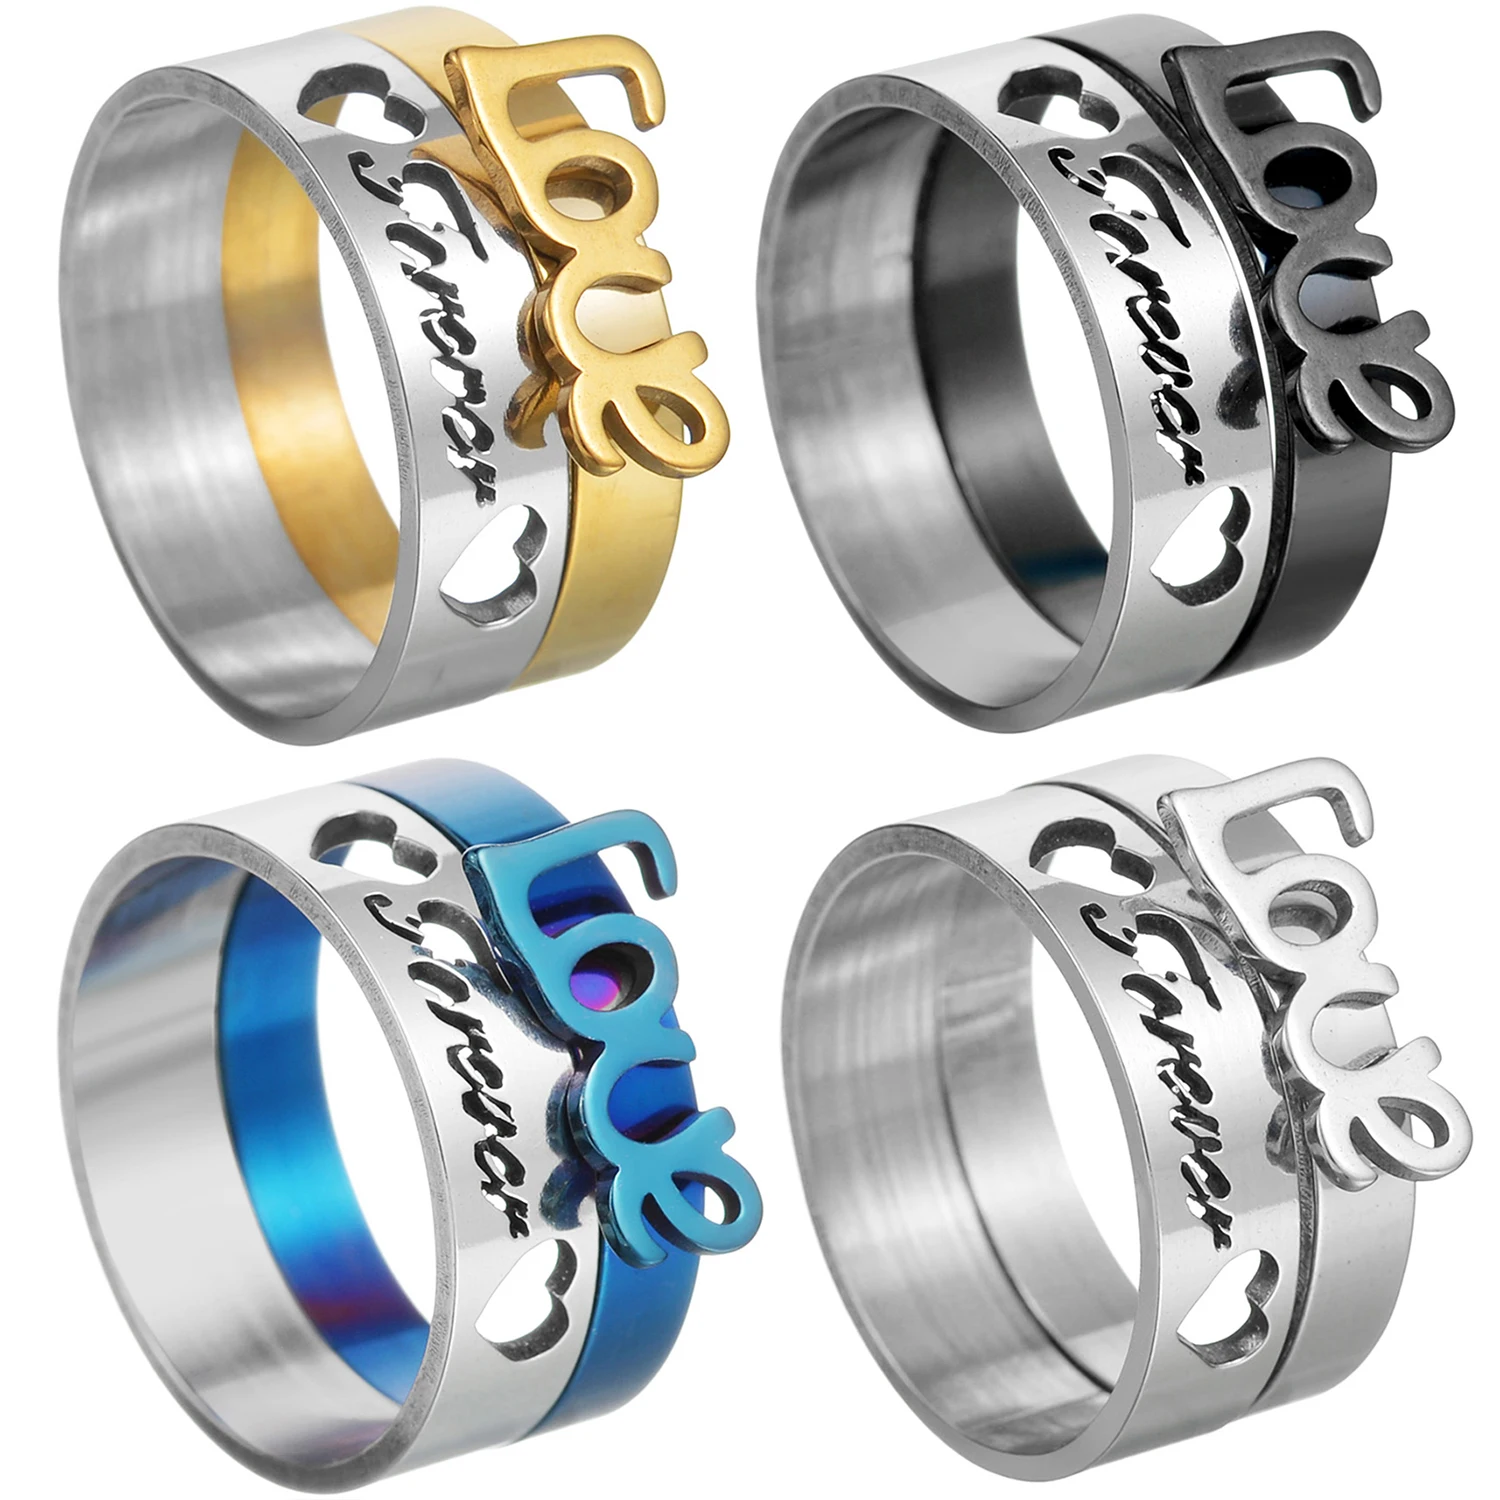 Gold & Silver Wedding Ring Set Stainless Steel Sets For Her And His,  Engagement And Wedding Parties From Rndlf, $31.36 | DHgate.Com